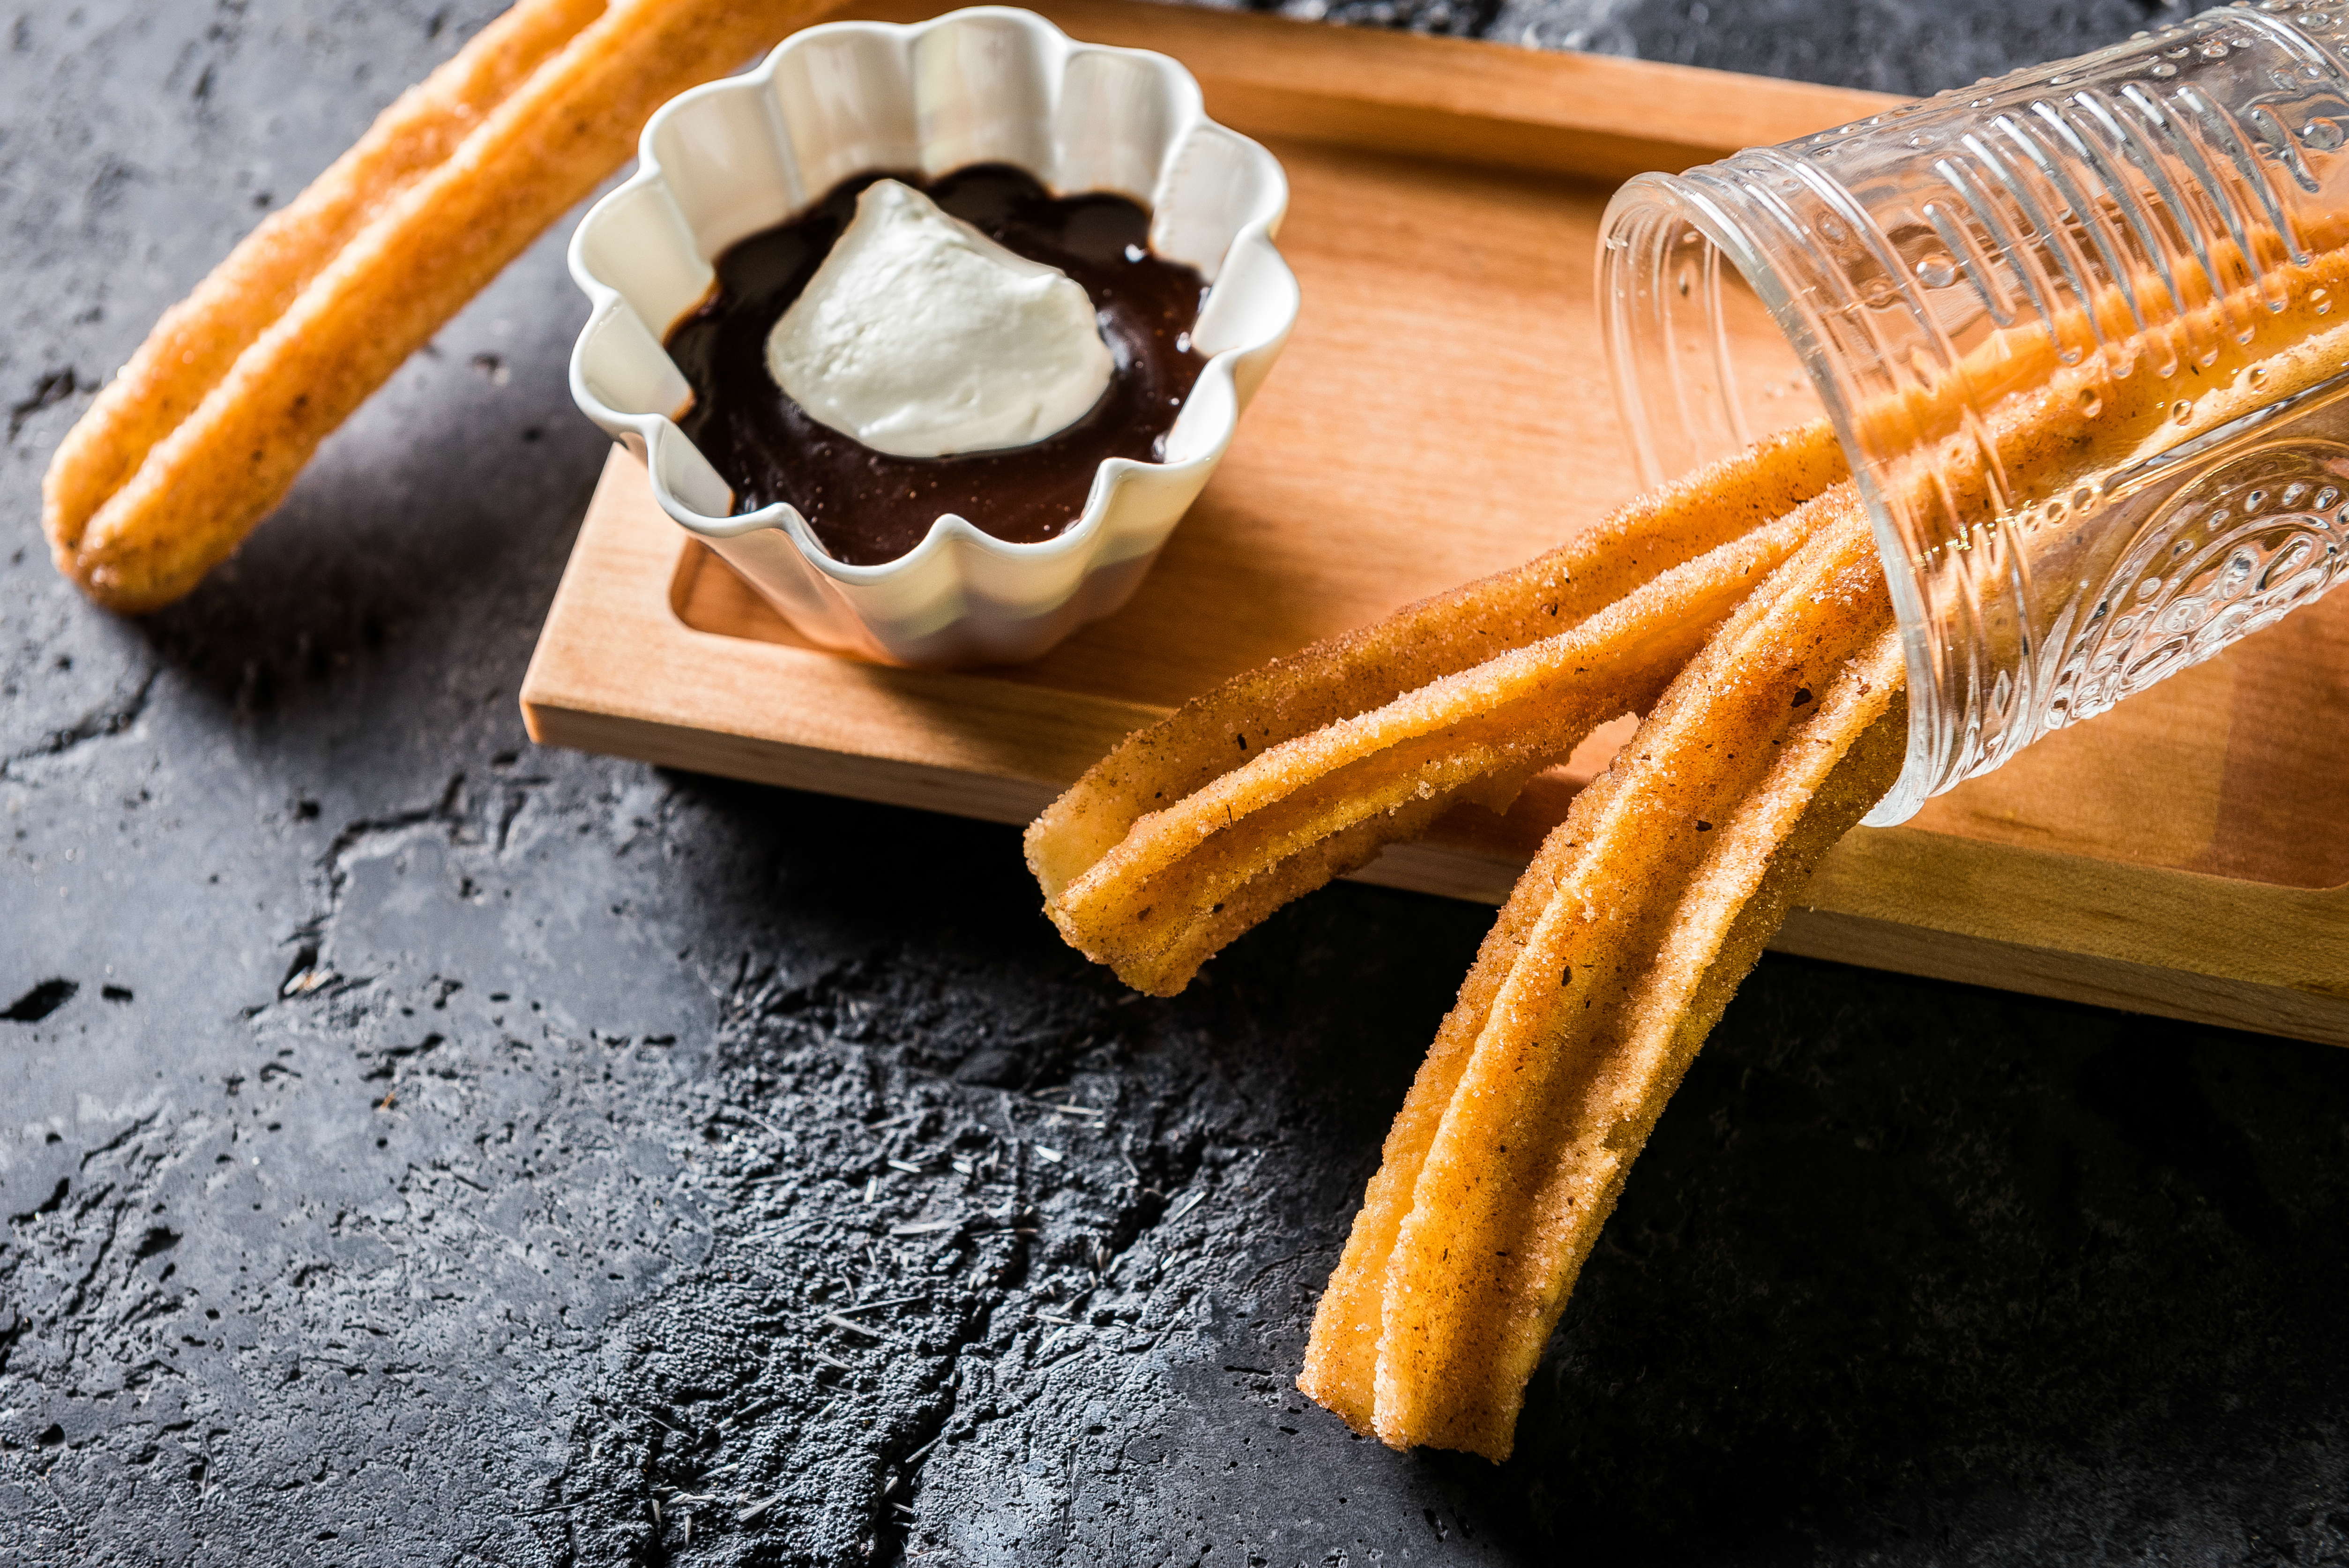 Churros from Mi Vida with a bittersweet chocolate sauce